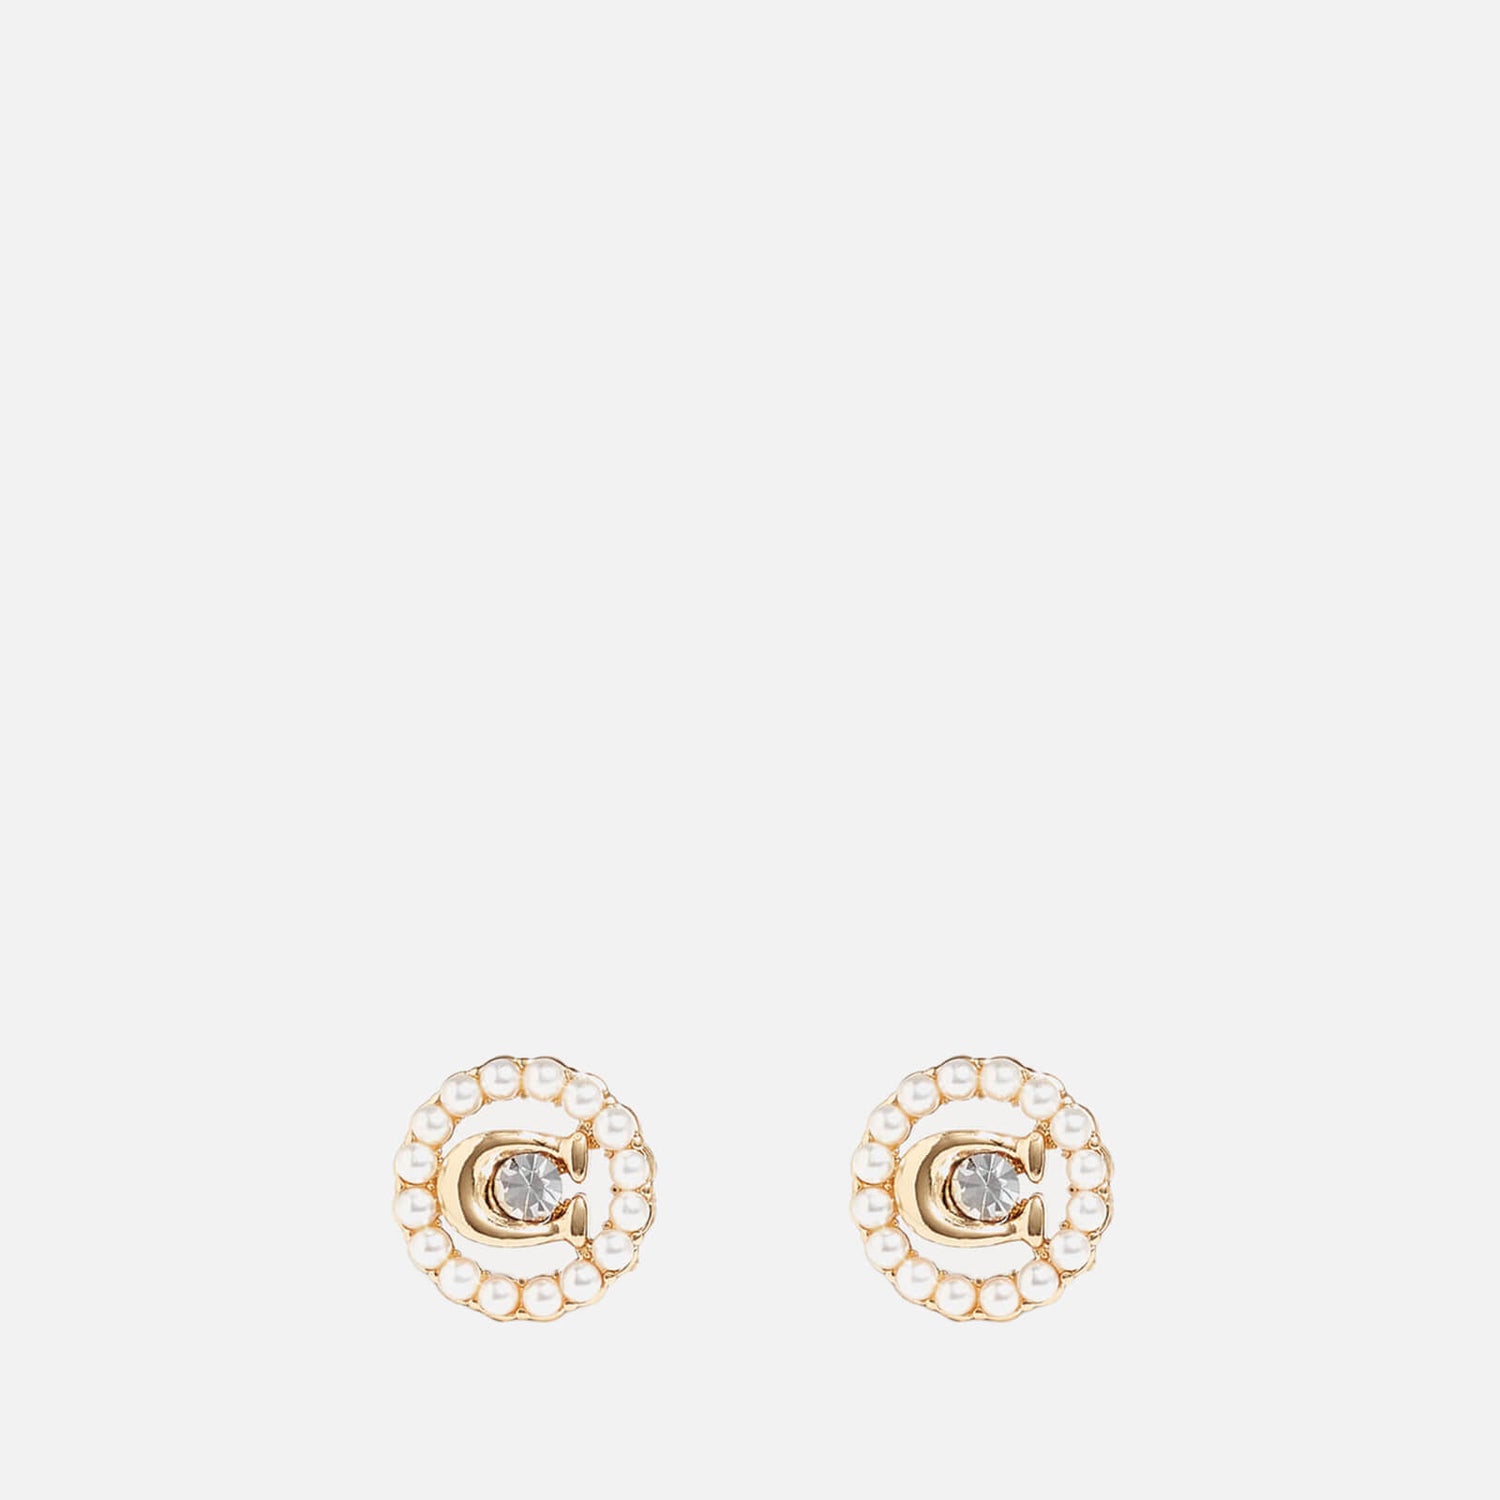 Coach C Gold-Plated Crystal and Faux Pearl Stud Earrings